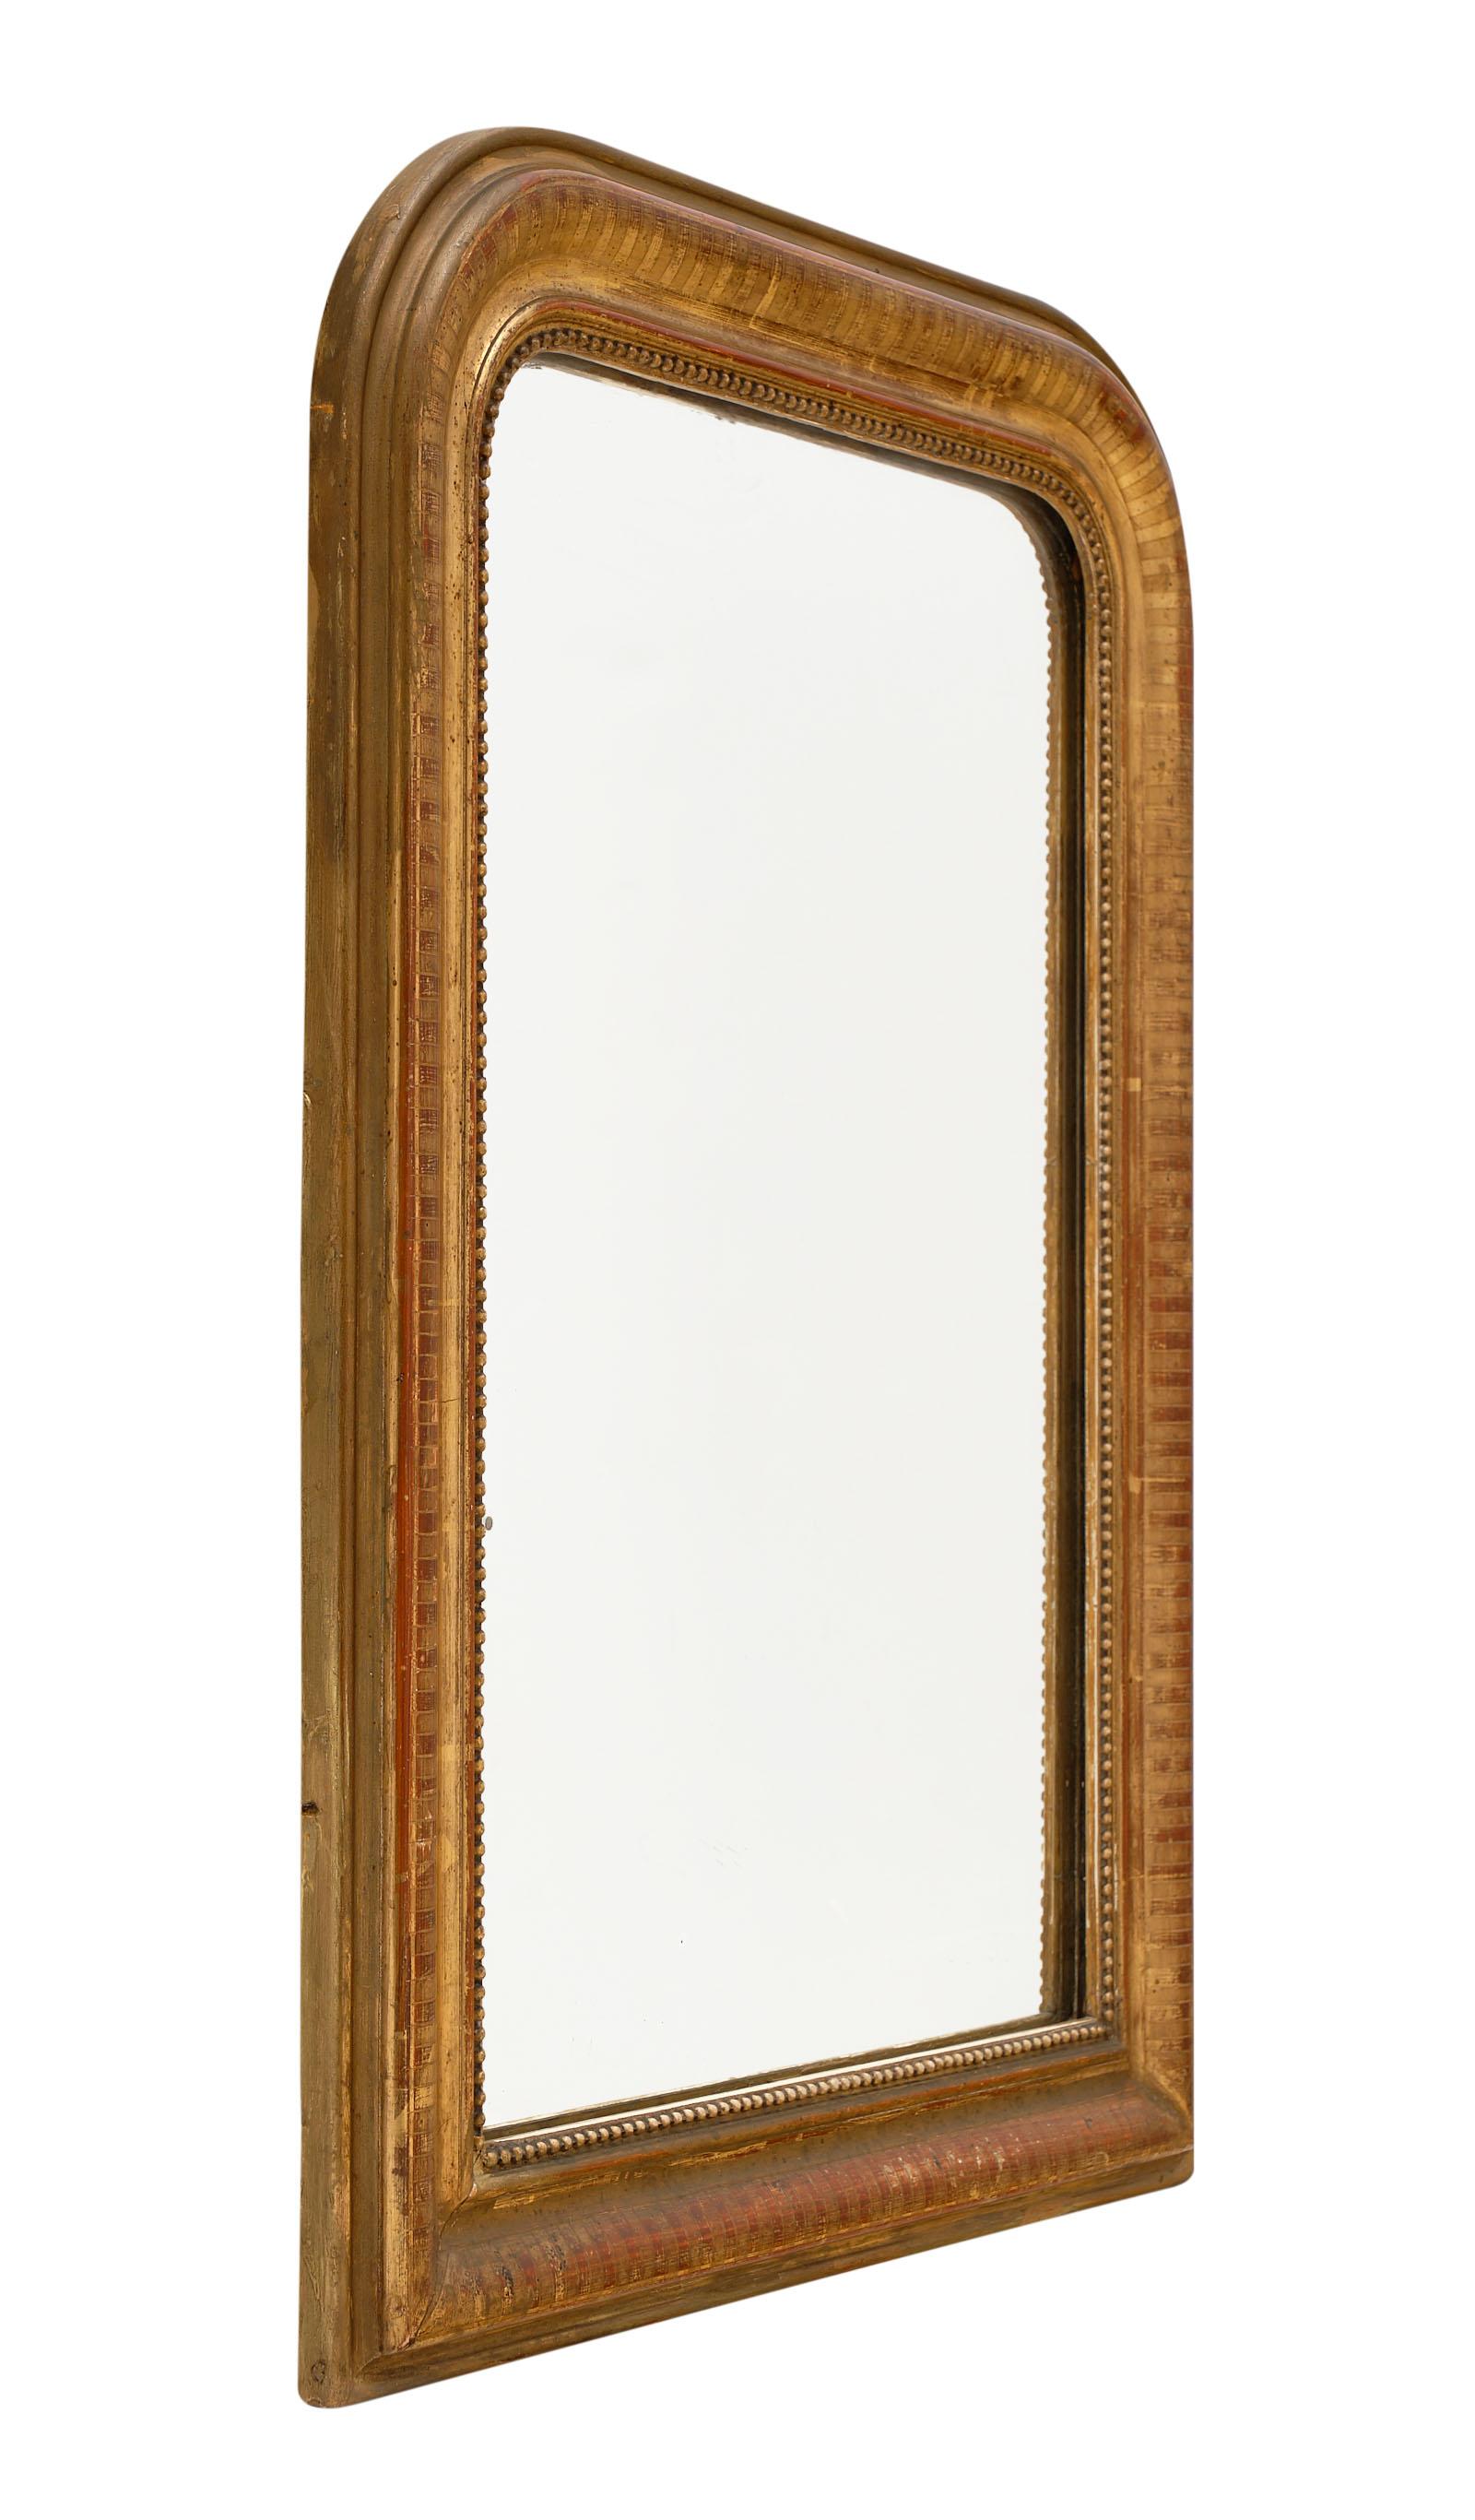 Louis Philippe period gold leaf mirror from the south of France with a beautiful hand-chiseled wood and gesso frame. The gold leaf has a beautiful patina and the sienna colored glaze shows through for a warm and inviting impact.